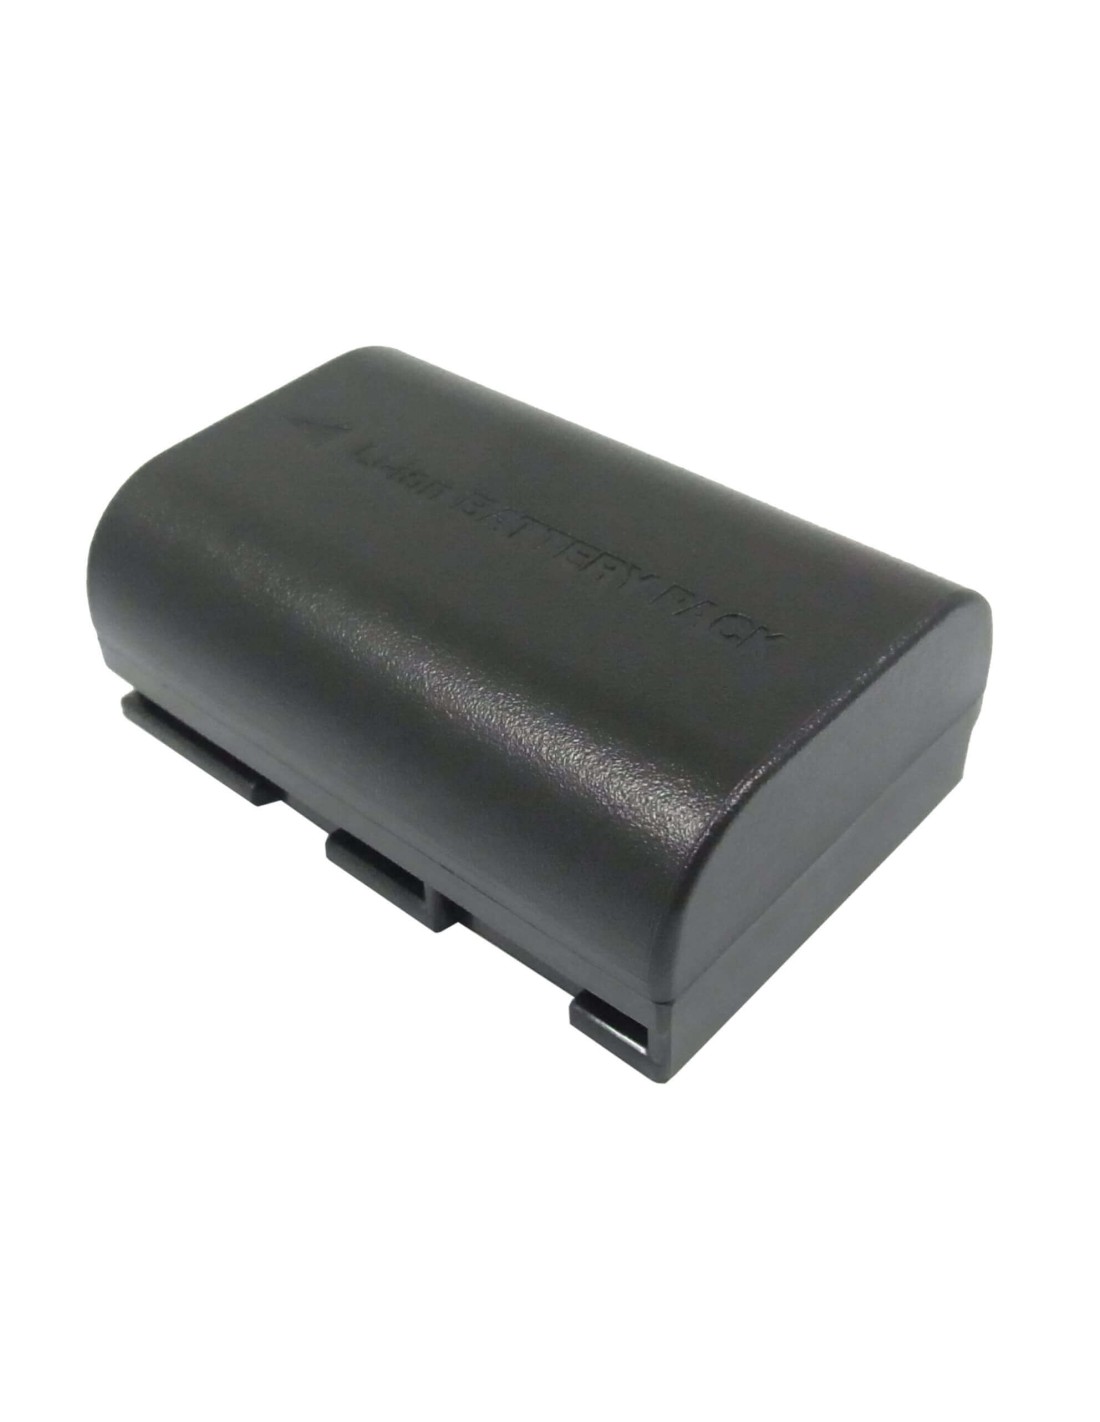 Battery for Canon 5d Mark Iii, Eos 7.4V, 2000mAh - 14.80Wh